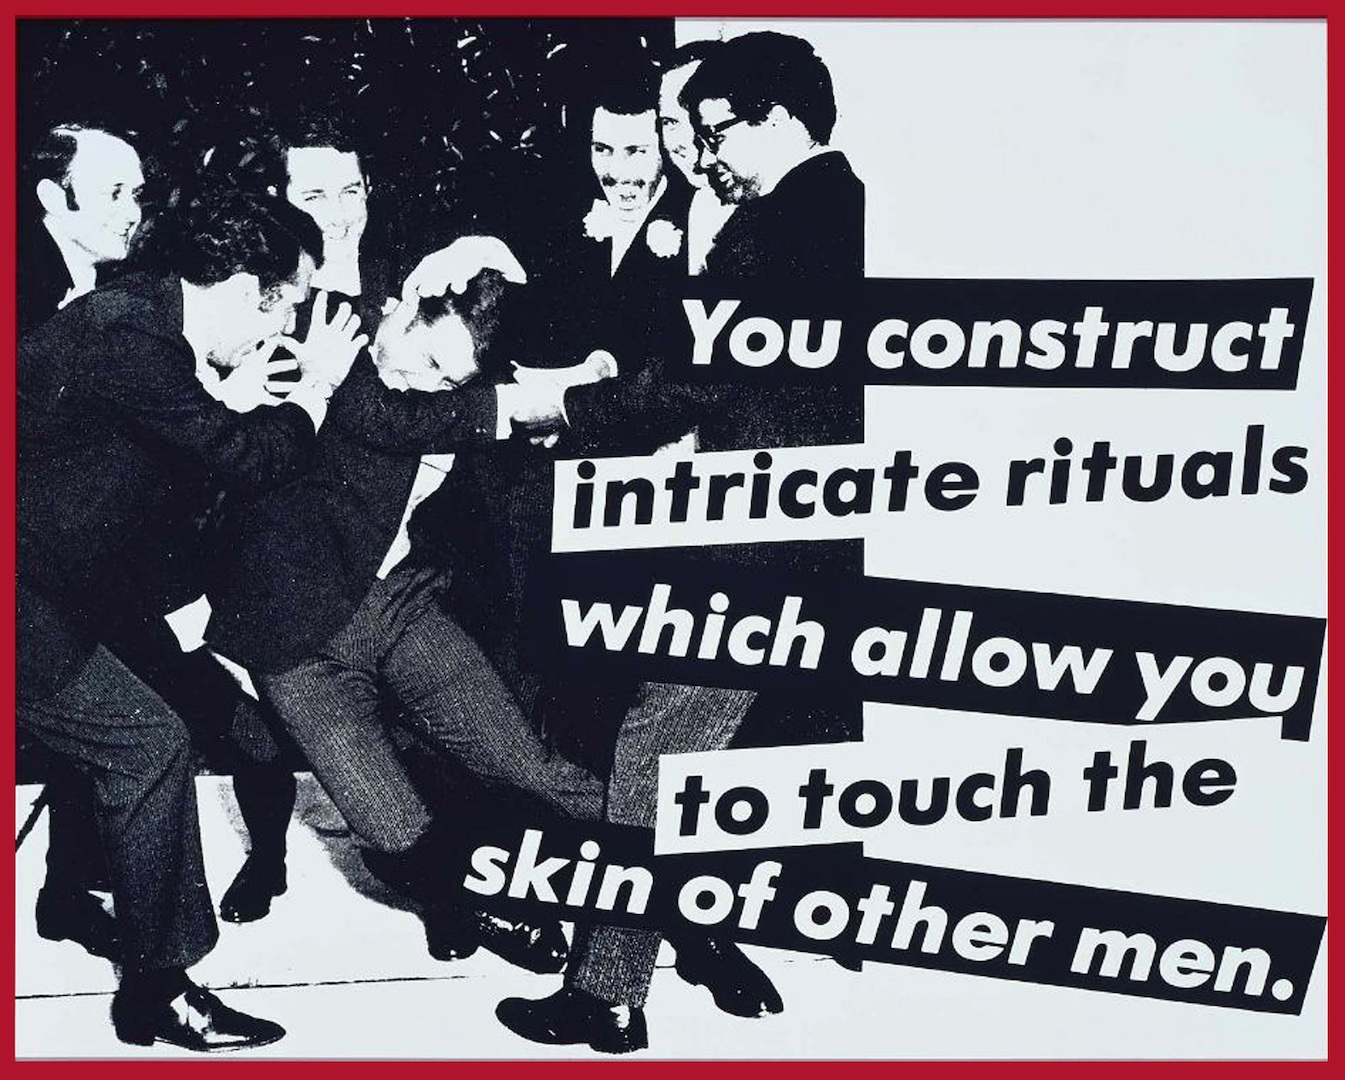 Barbara Kruger. Untitled (You construct intricate rituals which allow you to touch the skin of other men), 1980. Courtesy of Mary Boone Gallery, New York. © Barbara Kruger. Zdroj: art21.org.